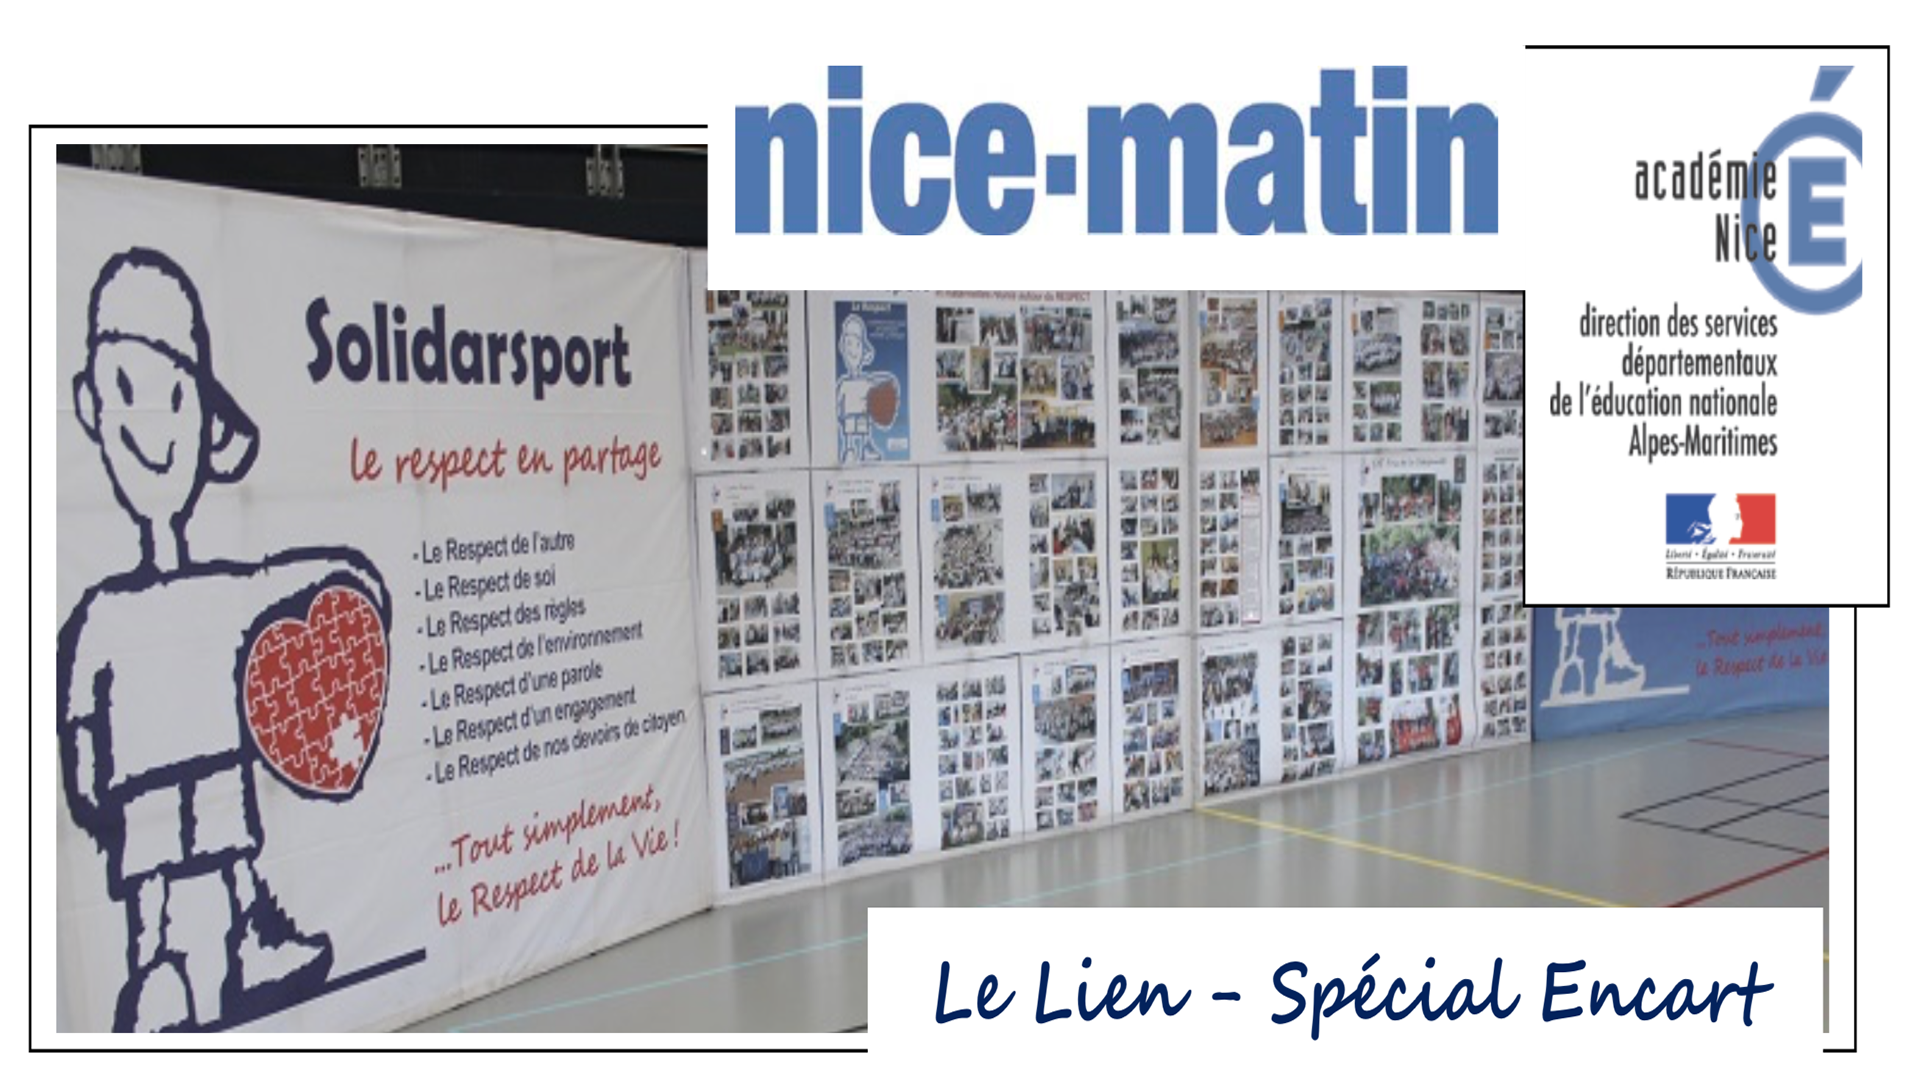 You are currently viewing Un Encart Spécial dans Nice-Matin